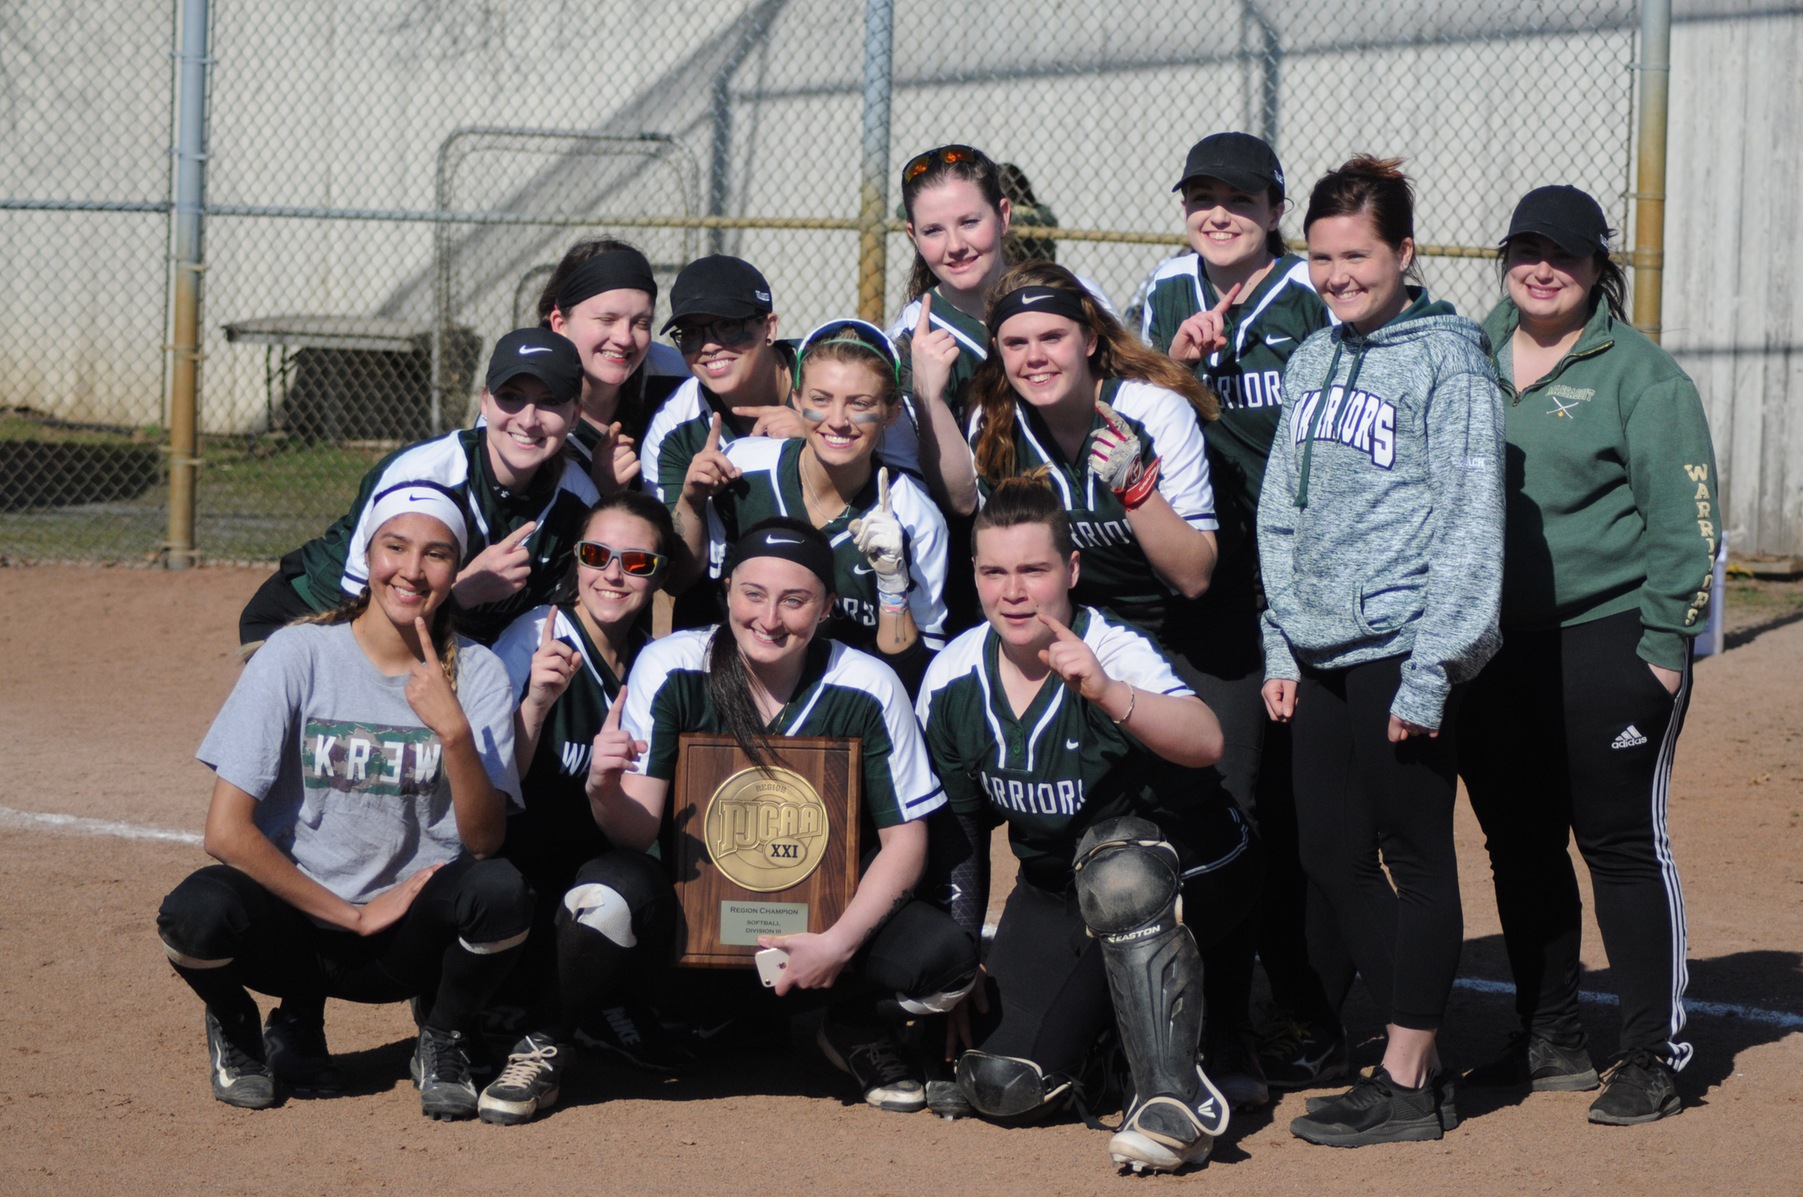 Softball Sweeps Northern Essex to Capture Region 21 Title